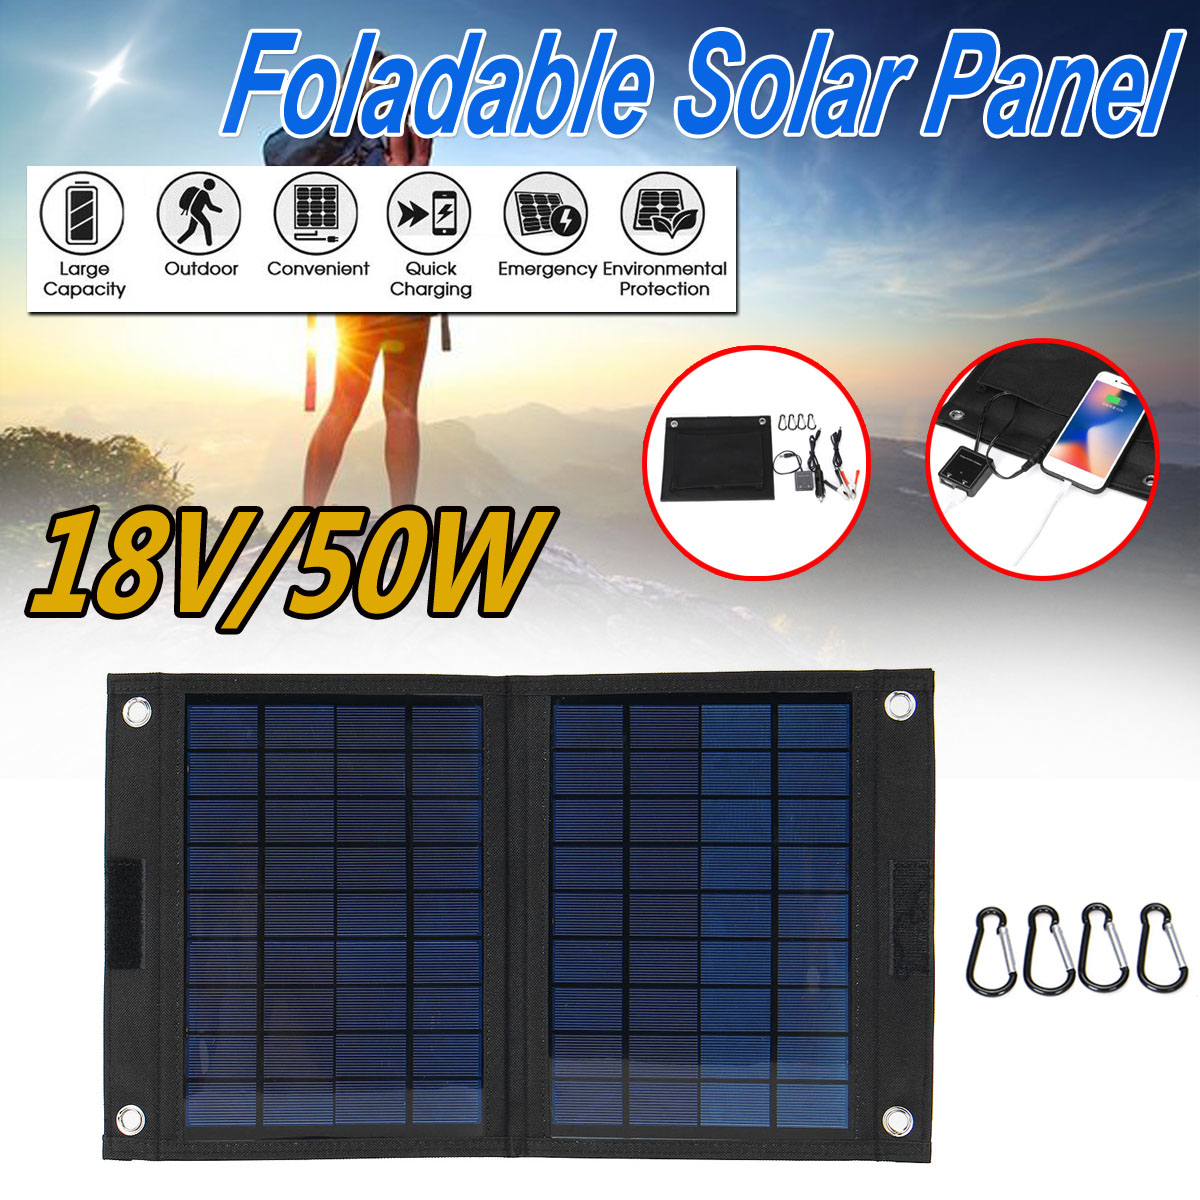 Sunpower-50W-18V-Foldable-Solar-Panel-Charger-Solar-Power-Bank-for-Camping-Hiking-USB-Backpacking-Po-1627758-1